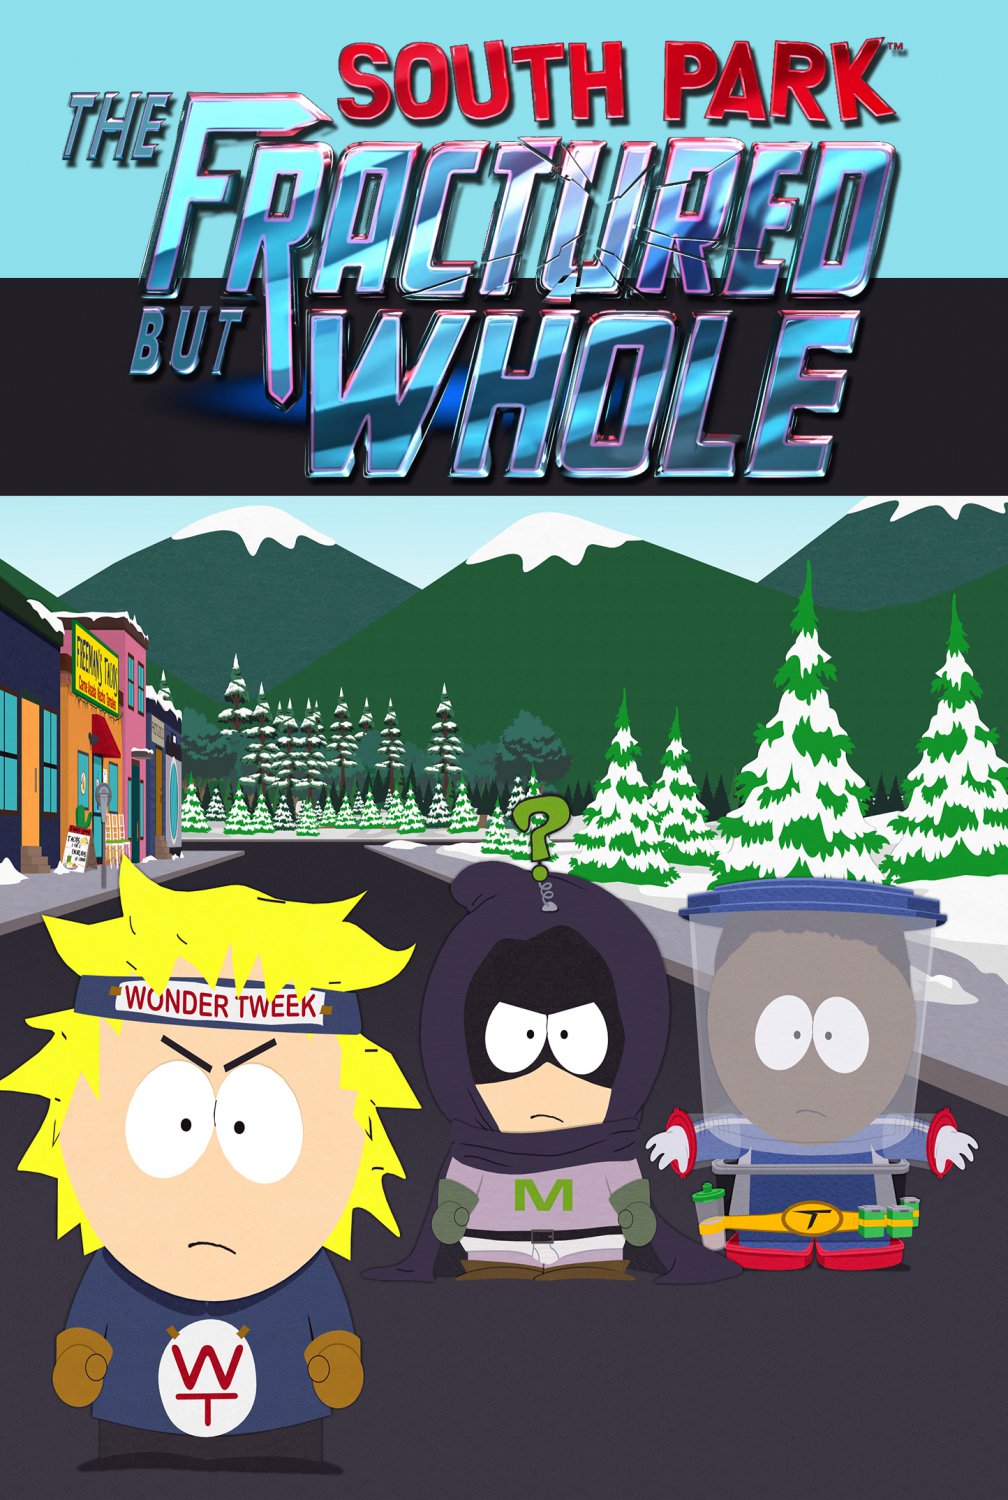 South Park The Fractured But Whole  13"x19" (32cm/49cm) Poster